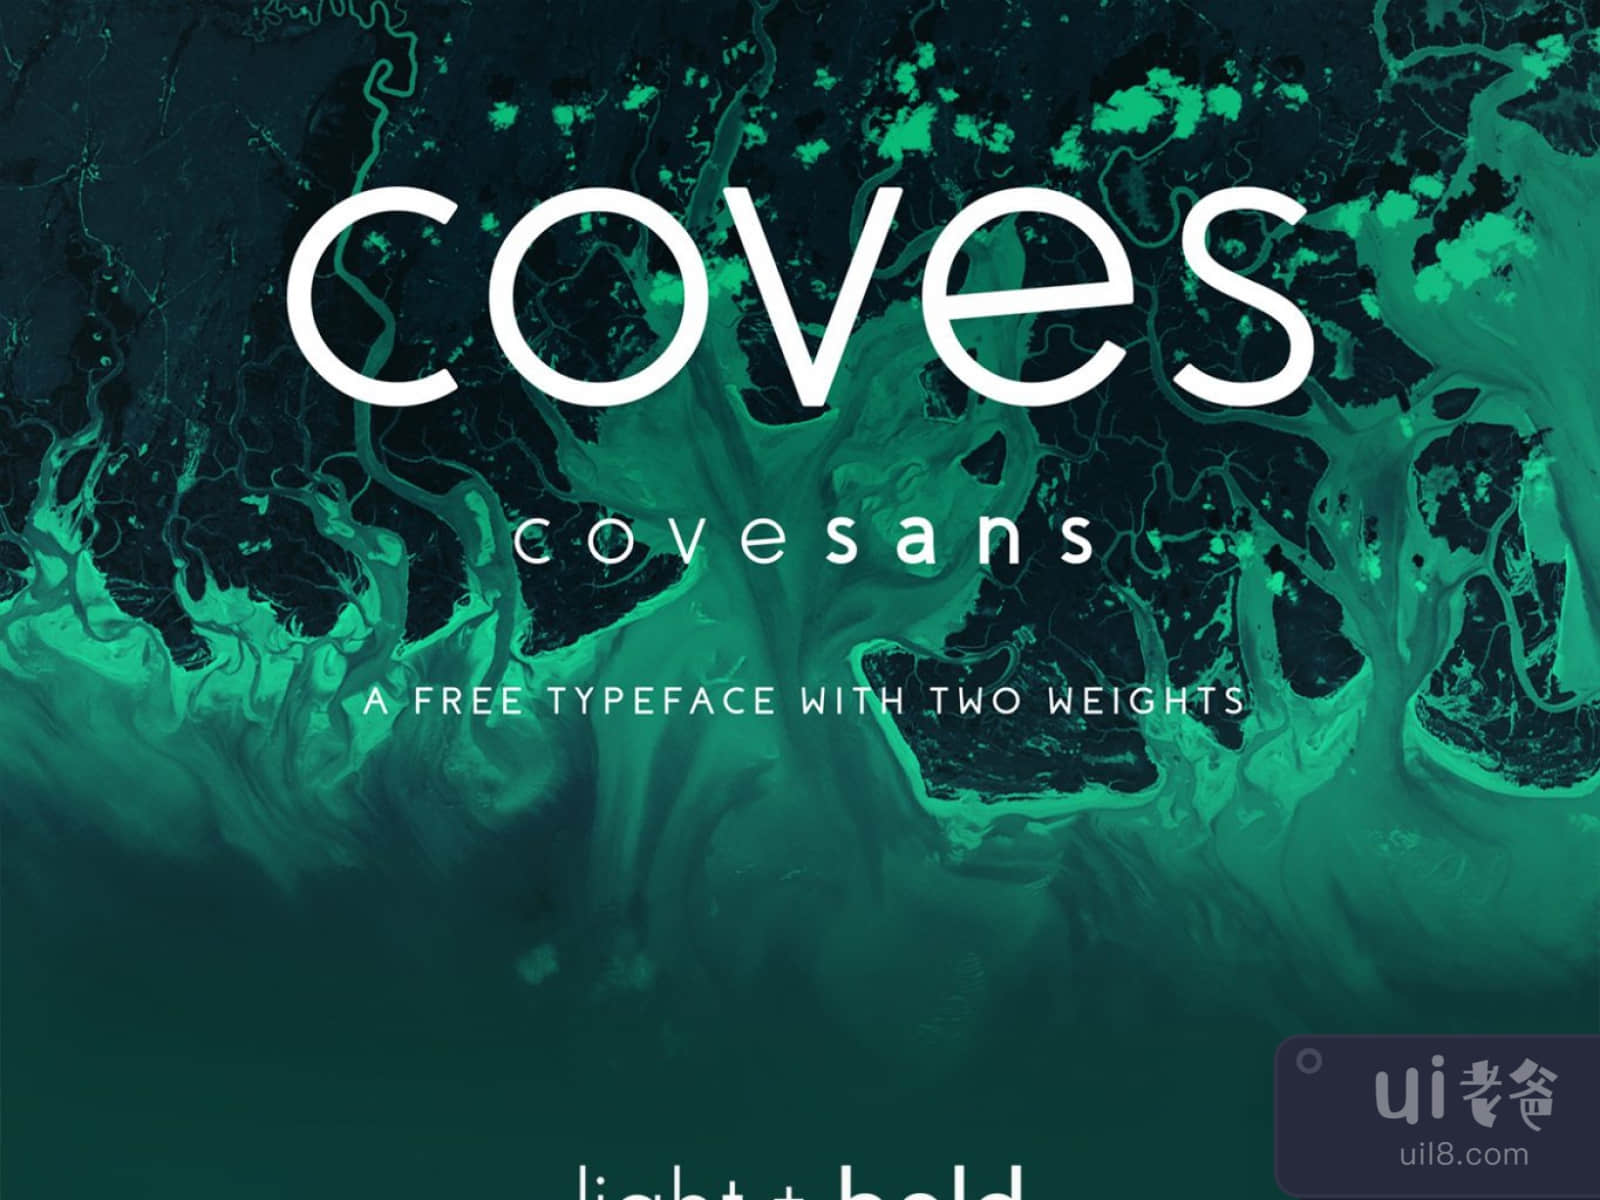 Coves Free Typeface for Figma and Adobe XD No 1